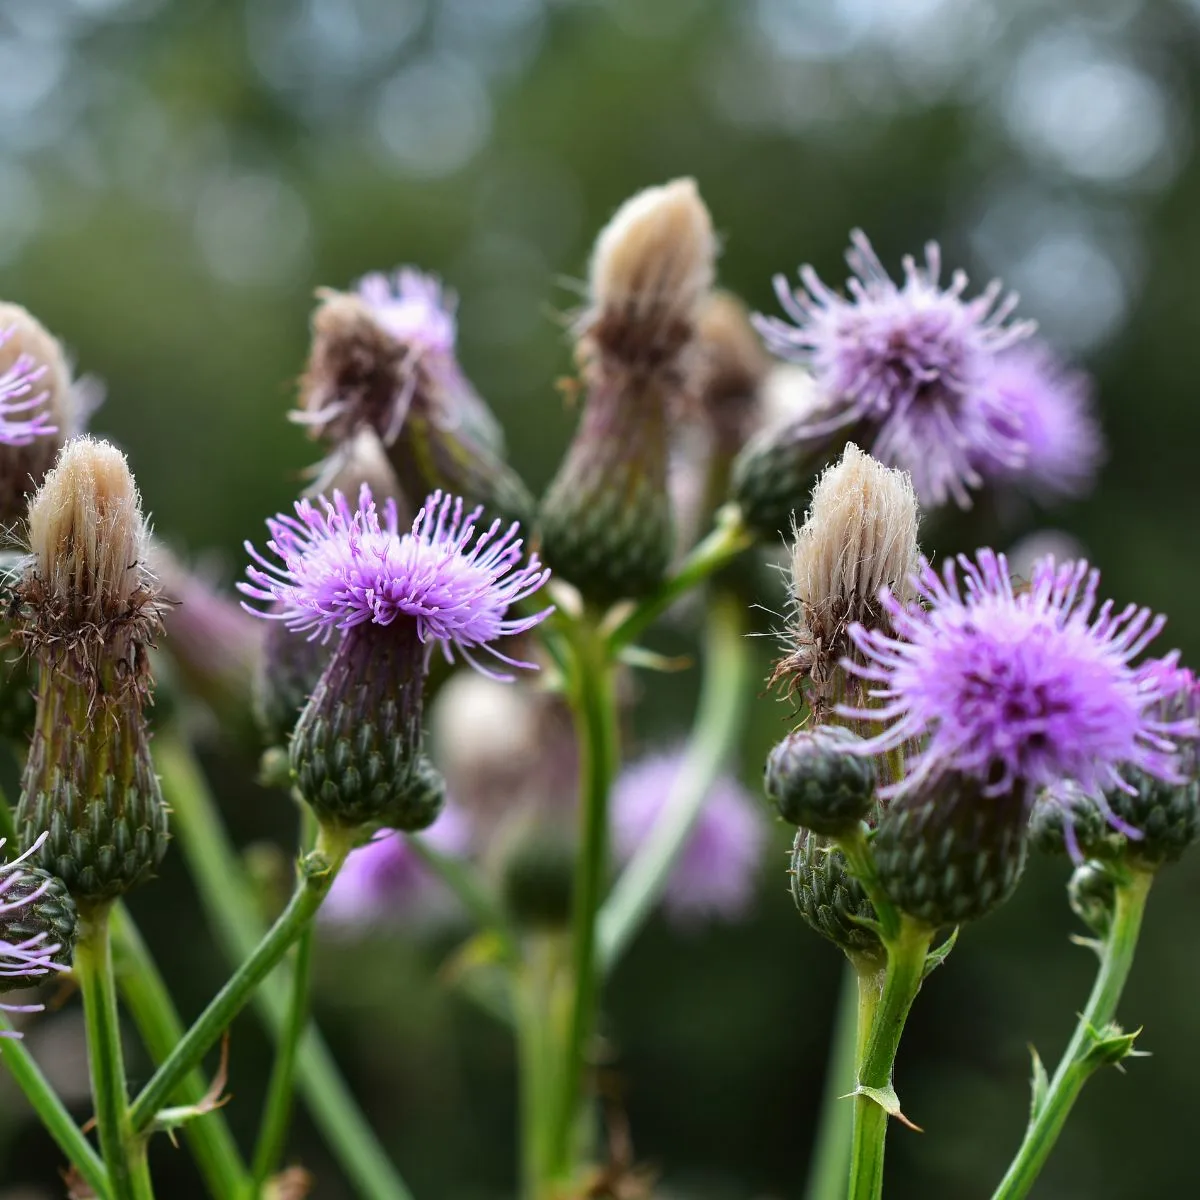 Canada thistle flowers.